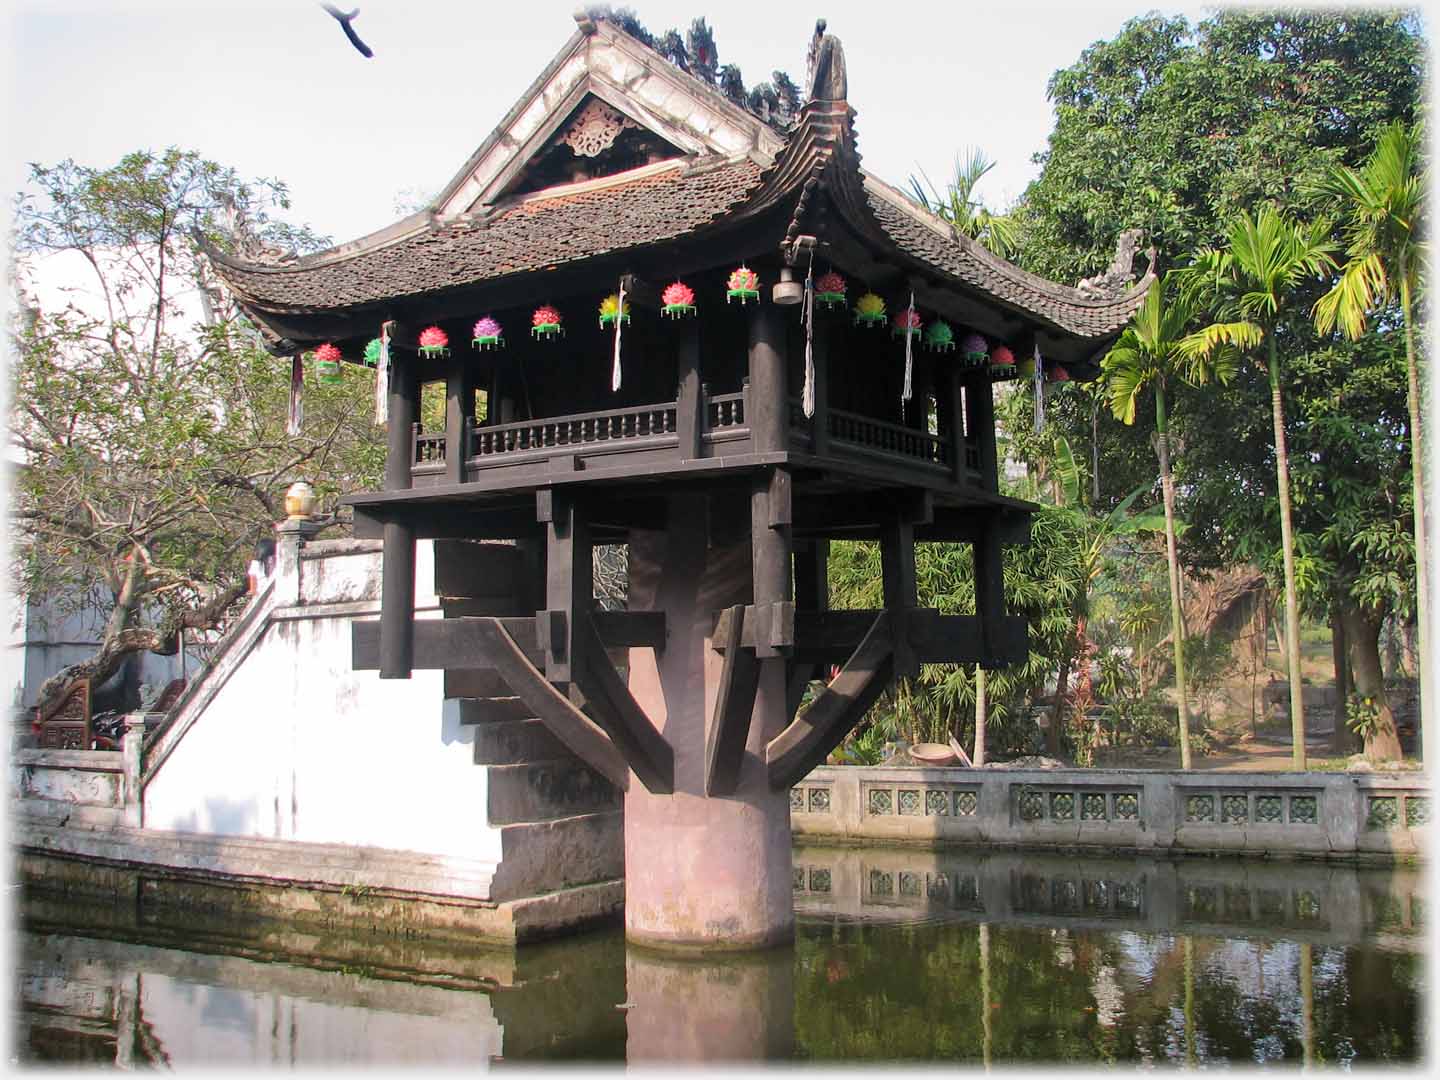 View of pagoda and steps in pool.